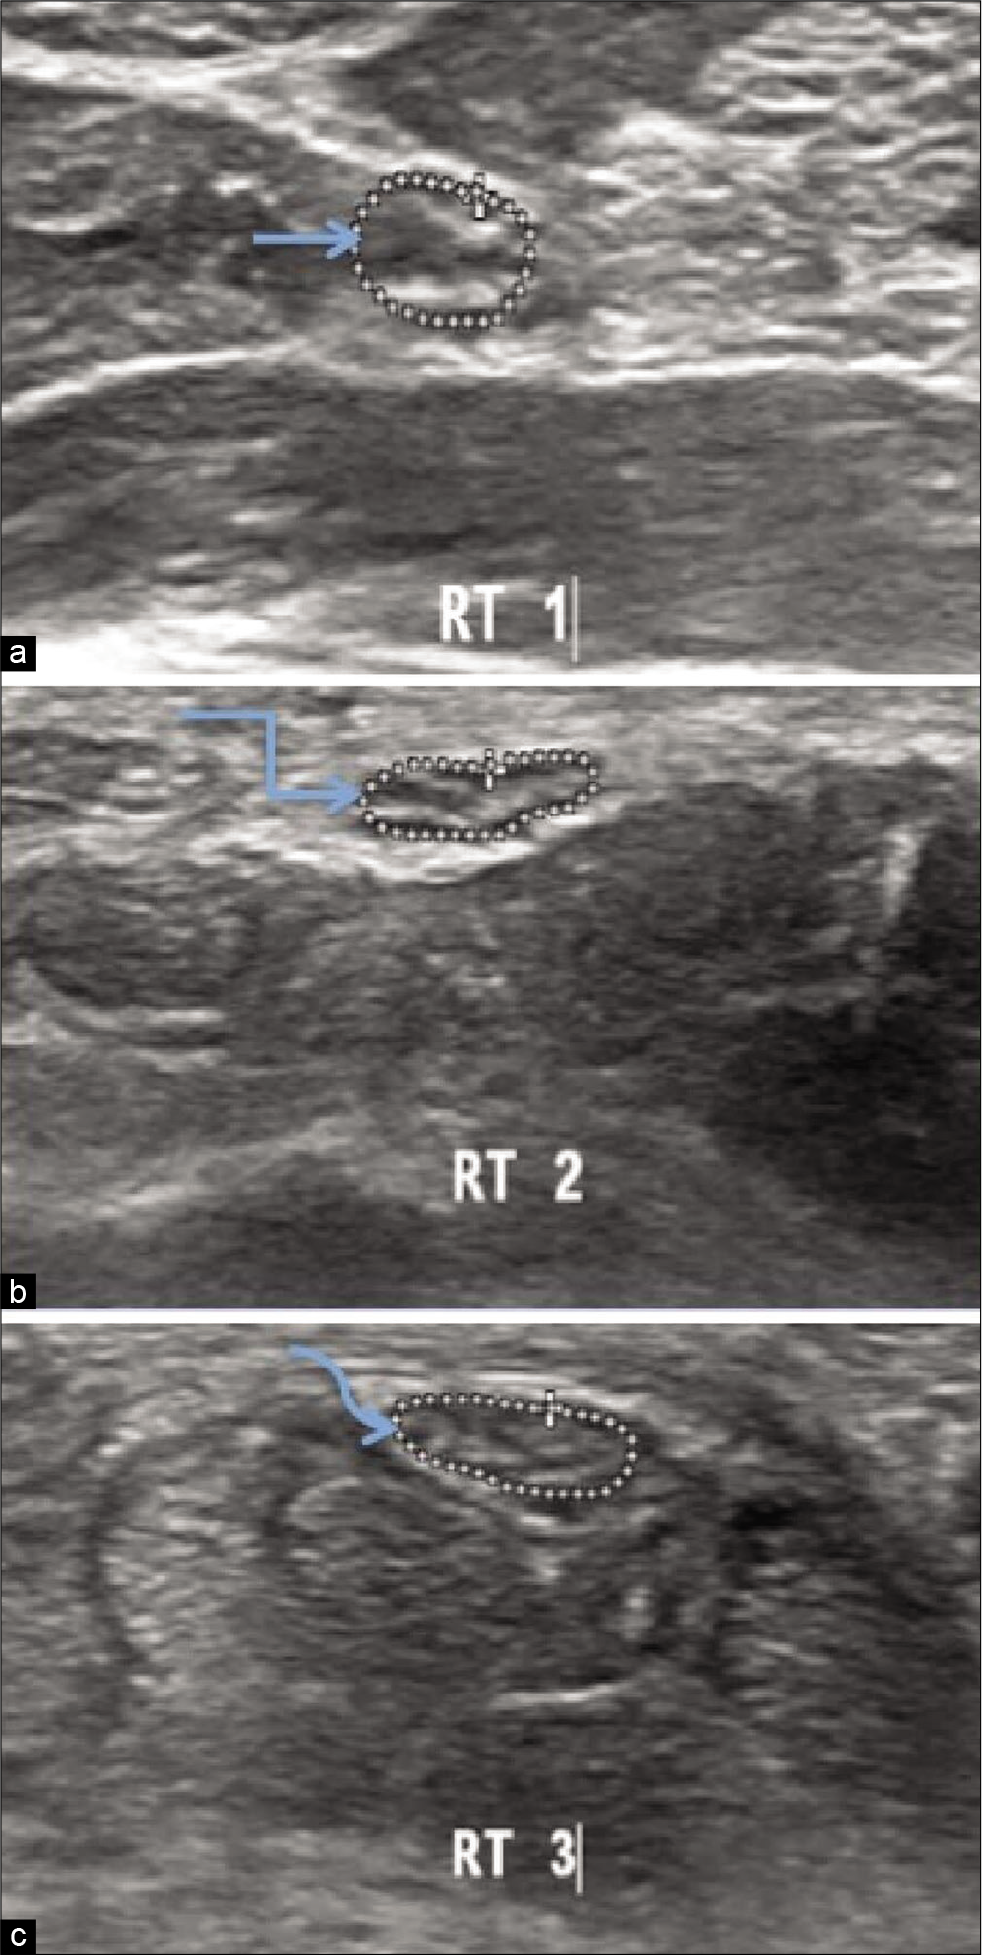 Ultrasonography image of the right median nerve of hypothyroidism patient at three levels in distal forearm showing (a) cross sectional area 0.060 cm2 at the level of pronator quadratus (straight arrow). (b) cross sectional area 0.057 cm2 proximal to the carpal tunnel inlet.(bent arrow) (c) cross sectional area 0.053 cm2 distal to the carpal tunnel outlet (curved arrow).